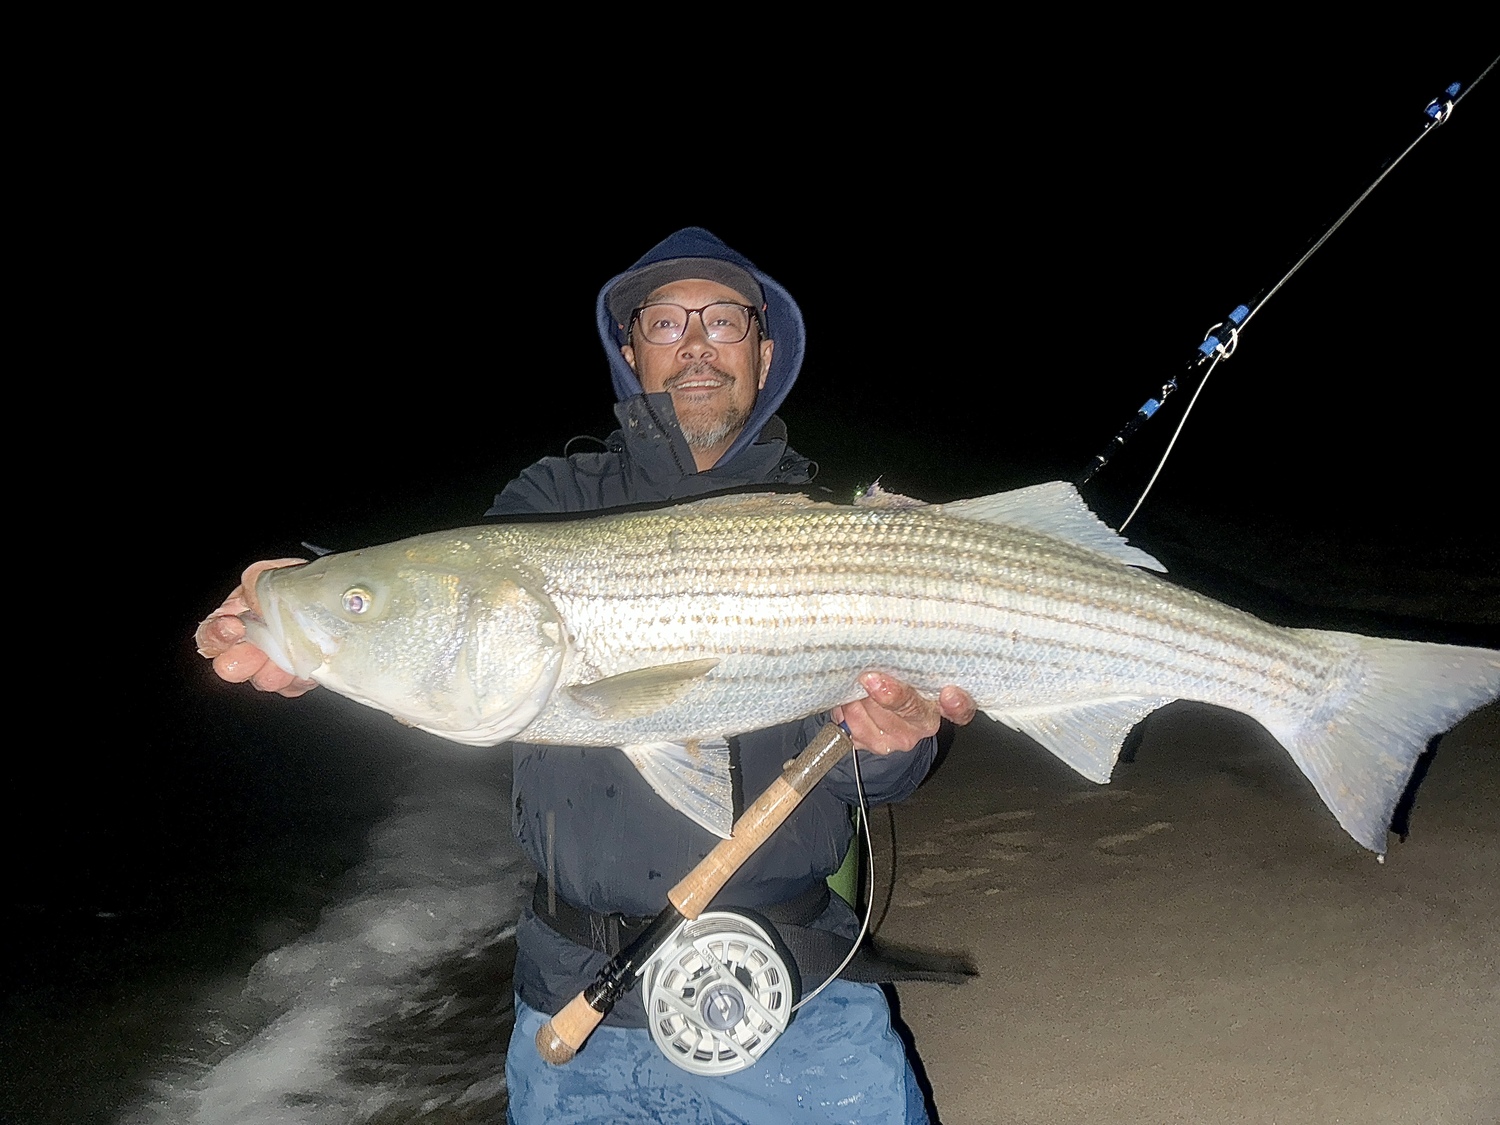 Fly fishing from the beach is pretty hard. Fly fishing at night is harder. Eiji Shiga has been tackling them both at the same time, with some rewarding results.